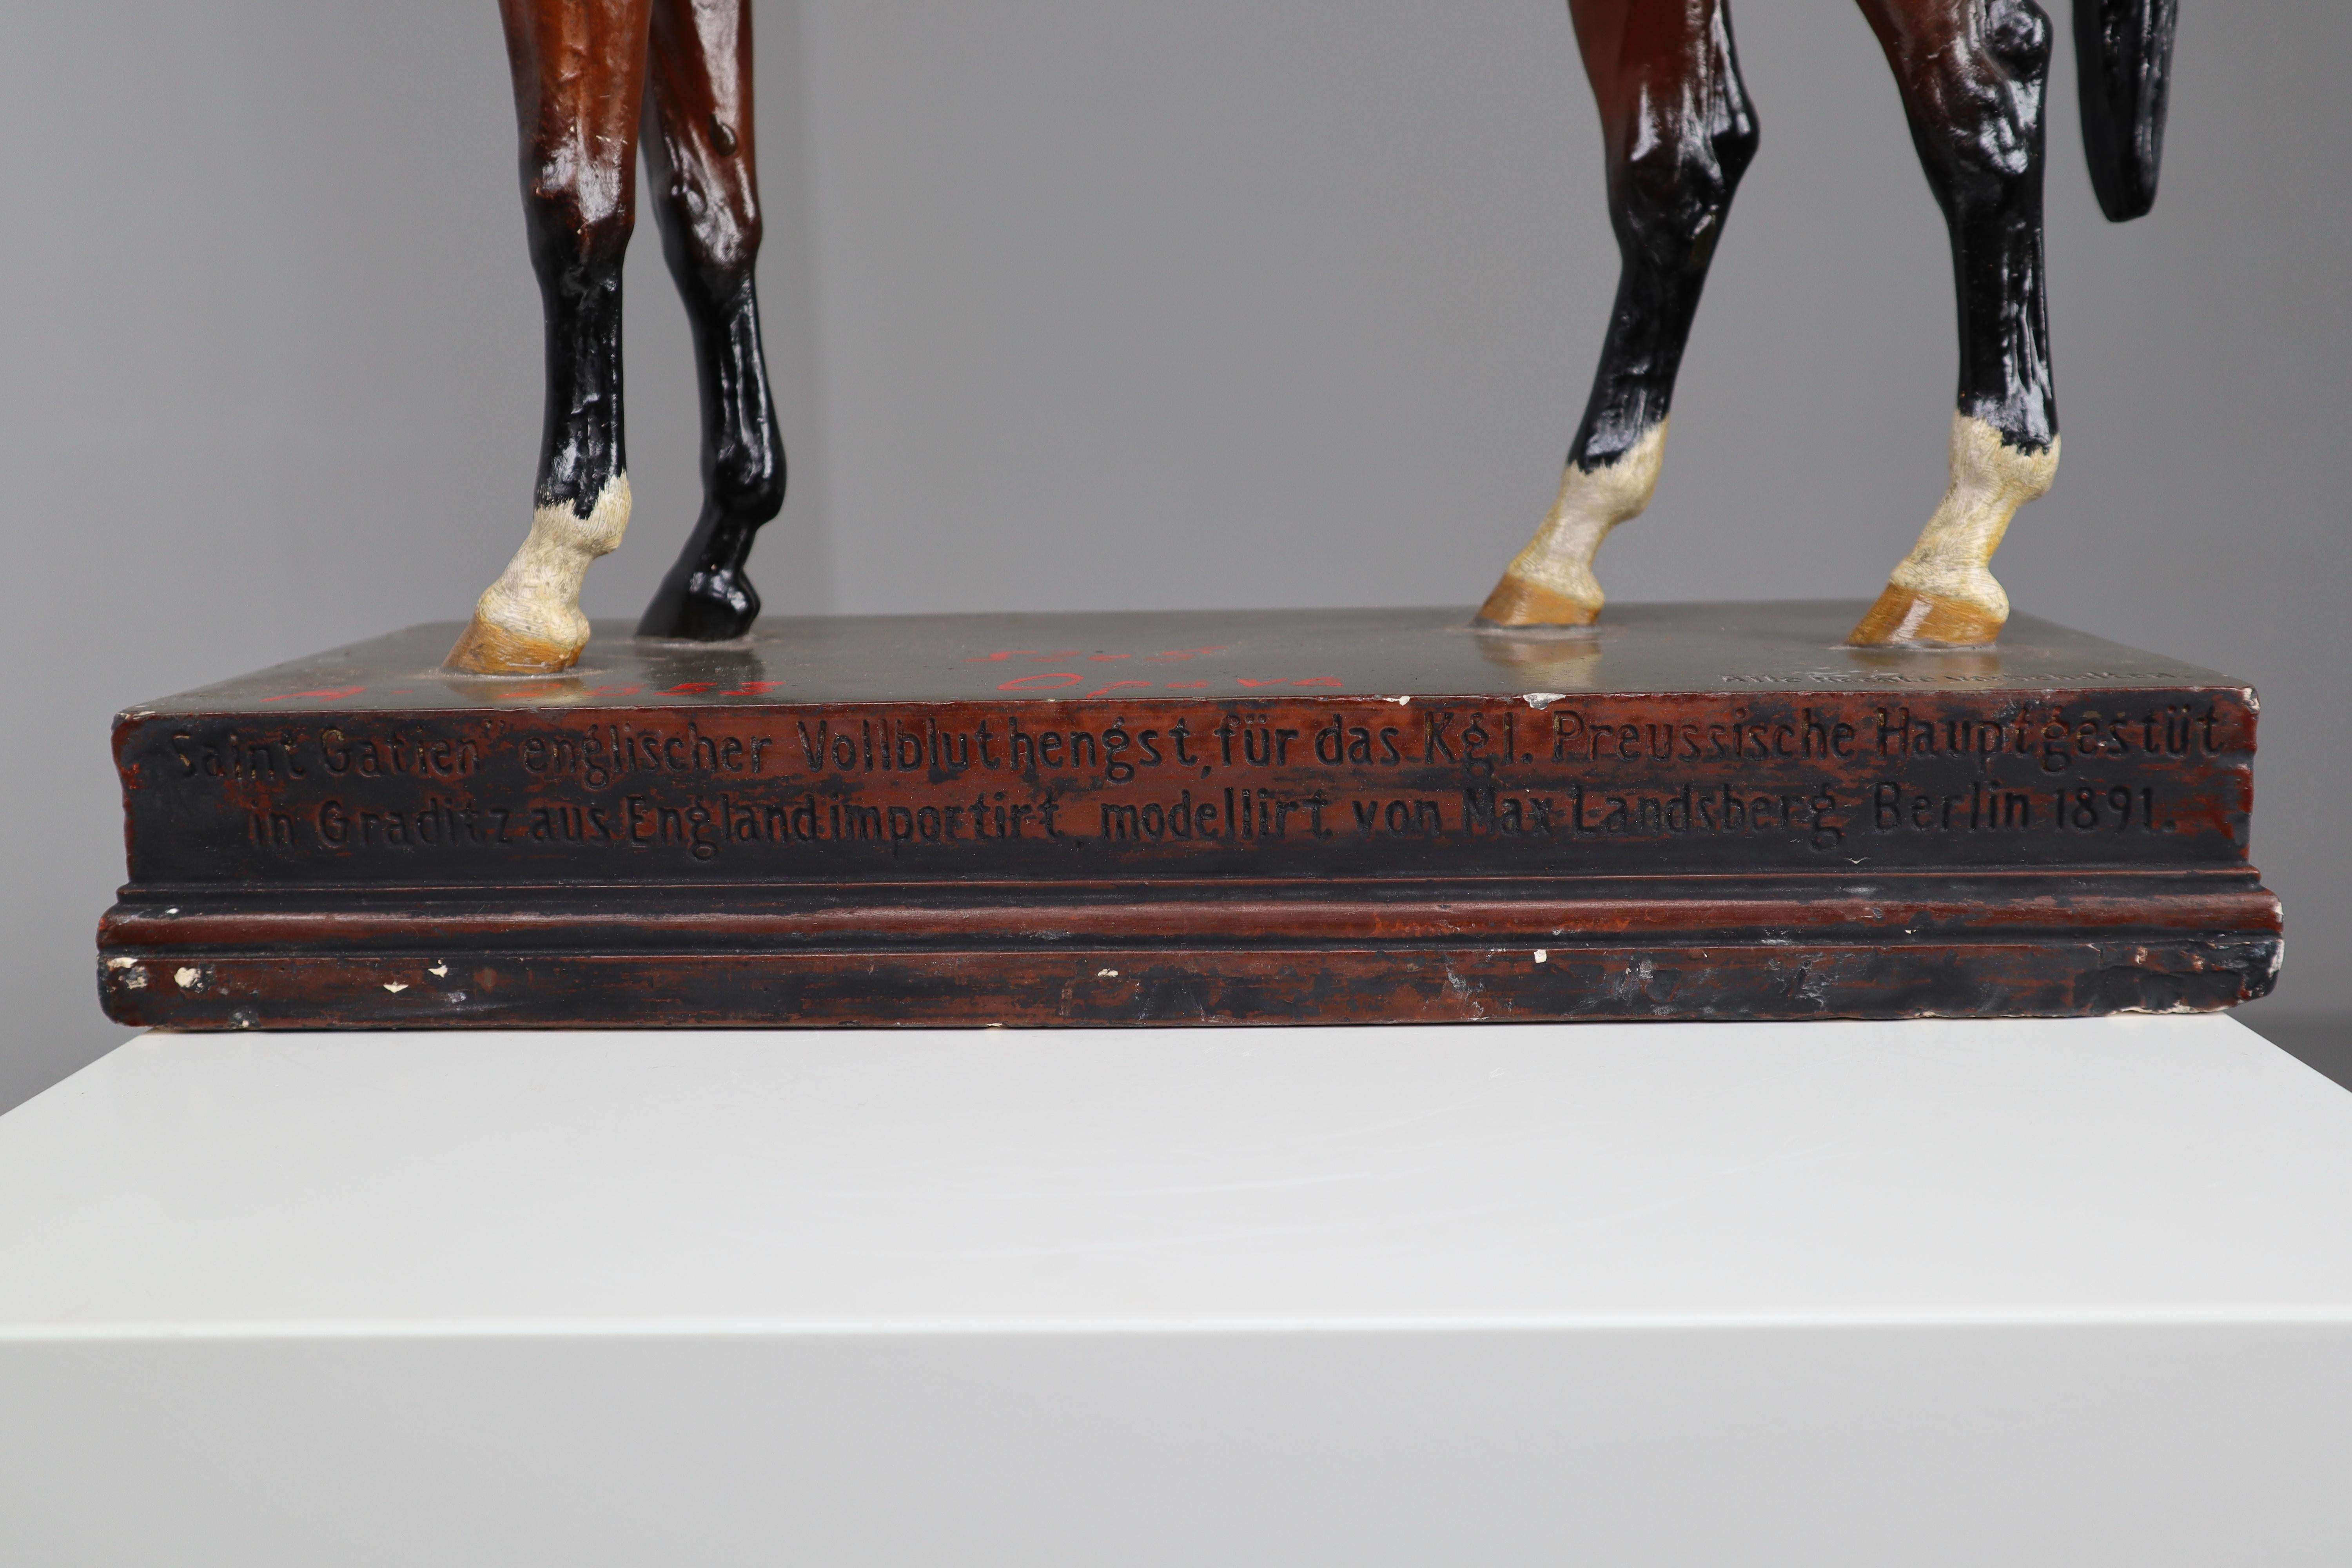 Thoroughbred Mare Horse Model in Painted Plaster by Max Landsberg, Berlin, 1891 1